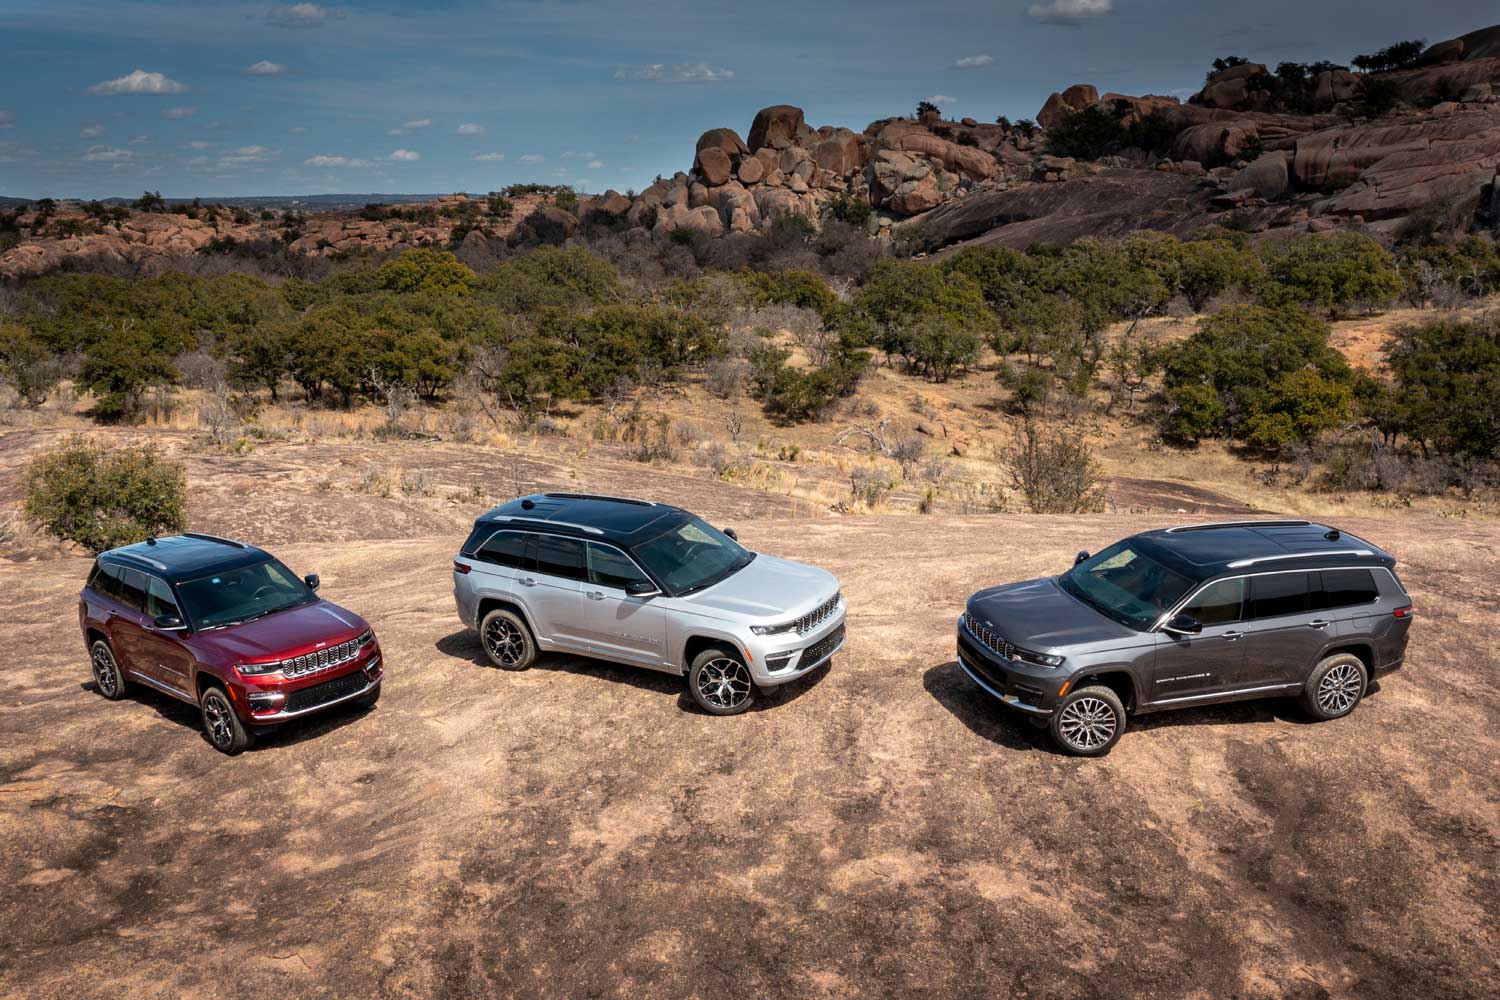 2022 Jeep Grand Cherokees in red, silver, and gray